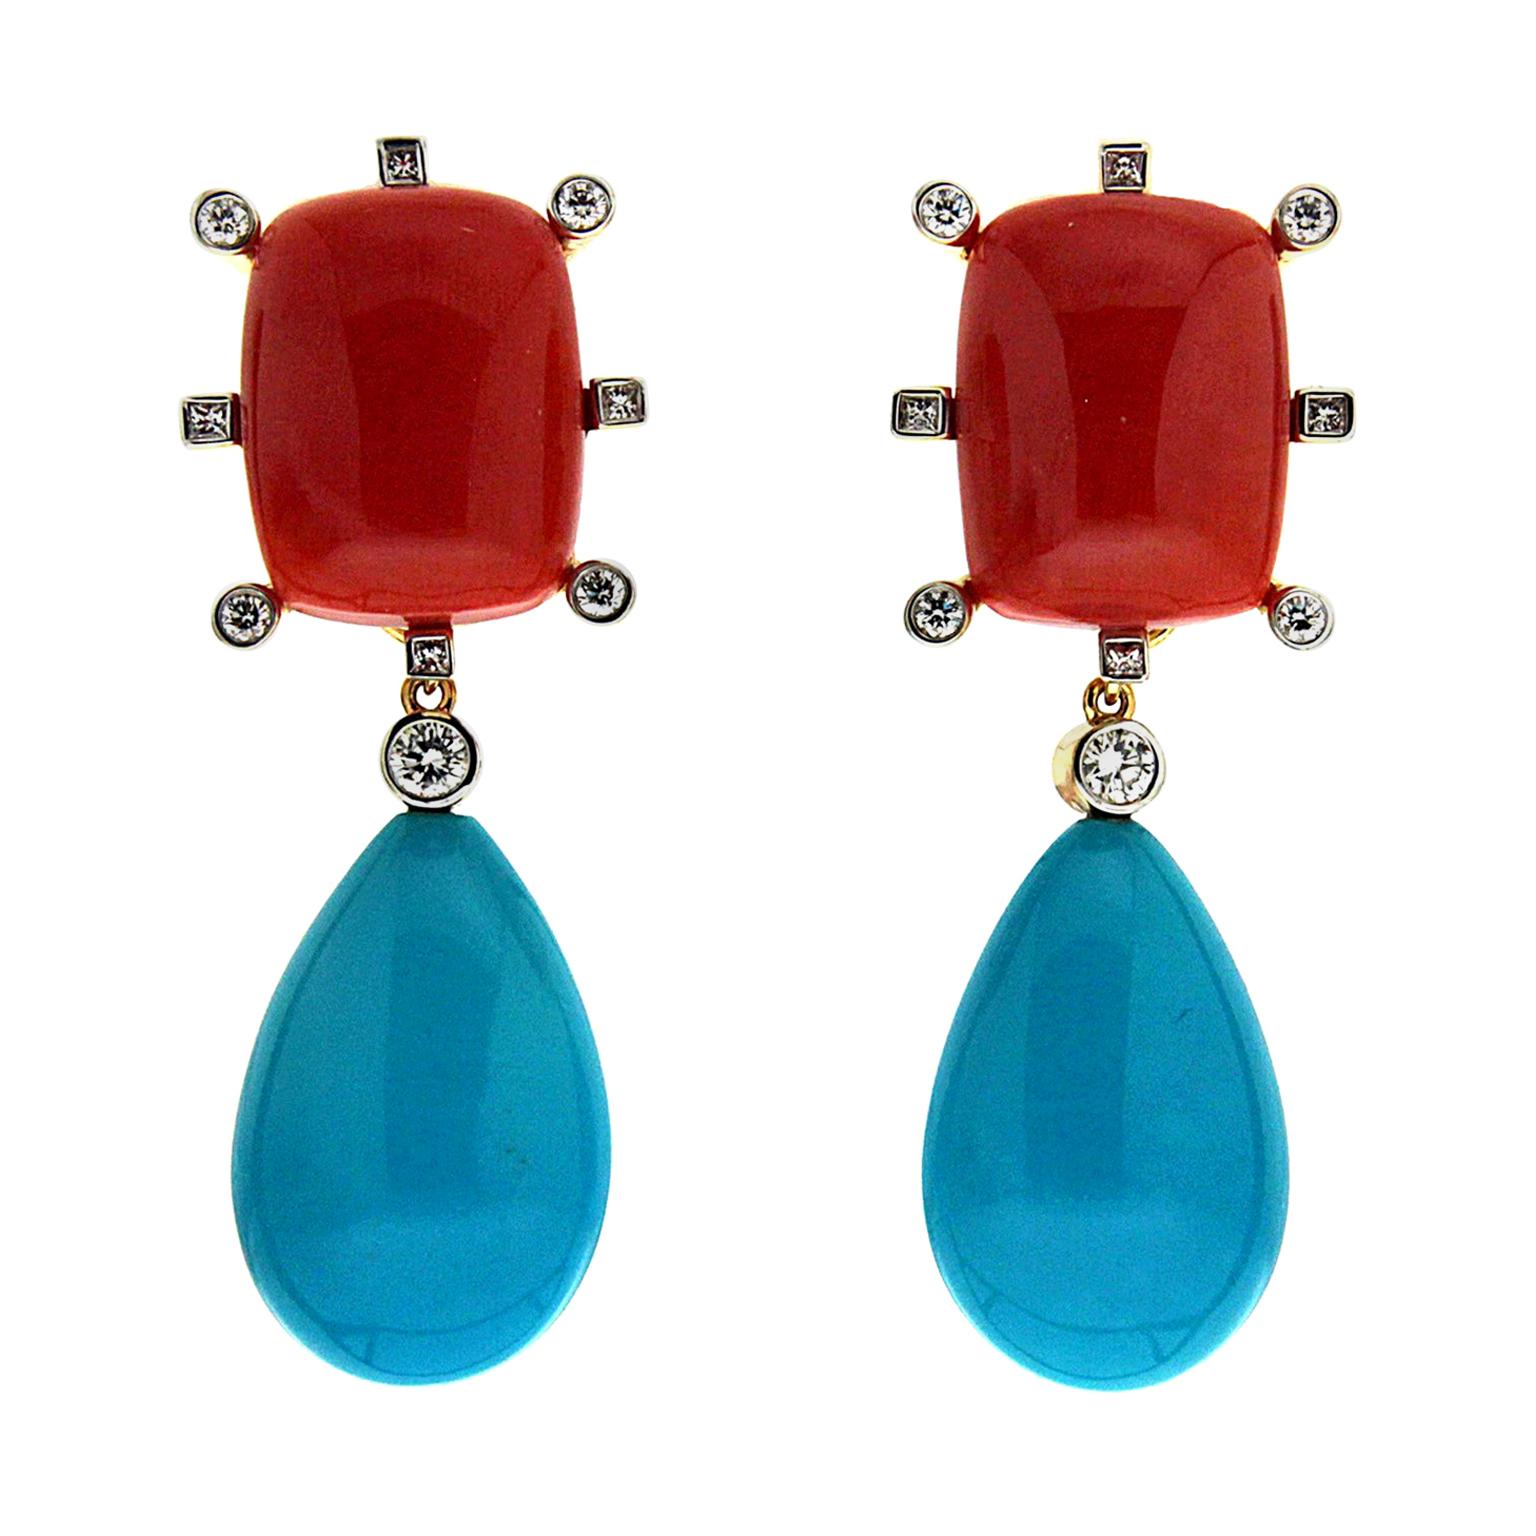 Valentin Magro Cushion Coral and Tear Drop Turquoise Earrings